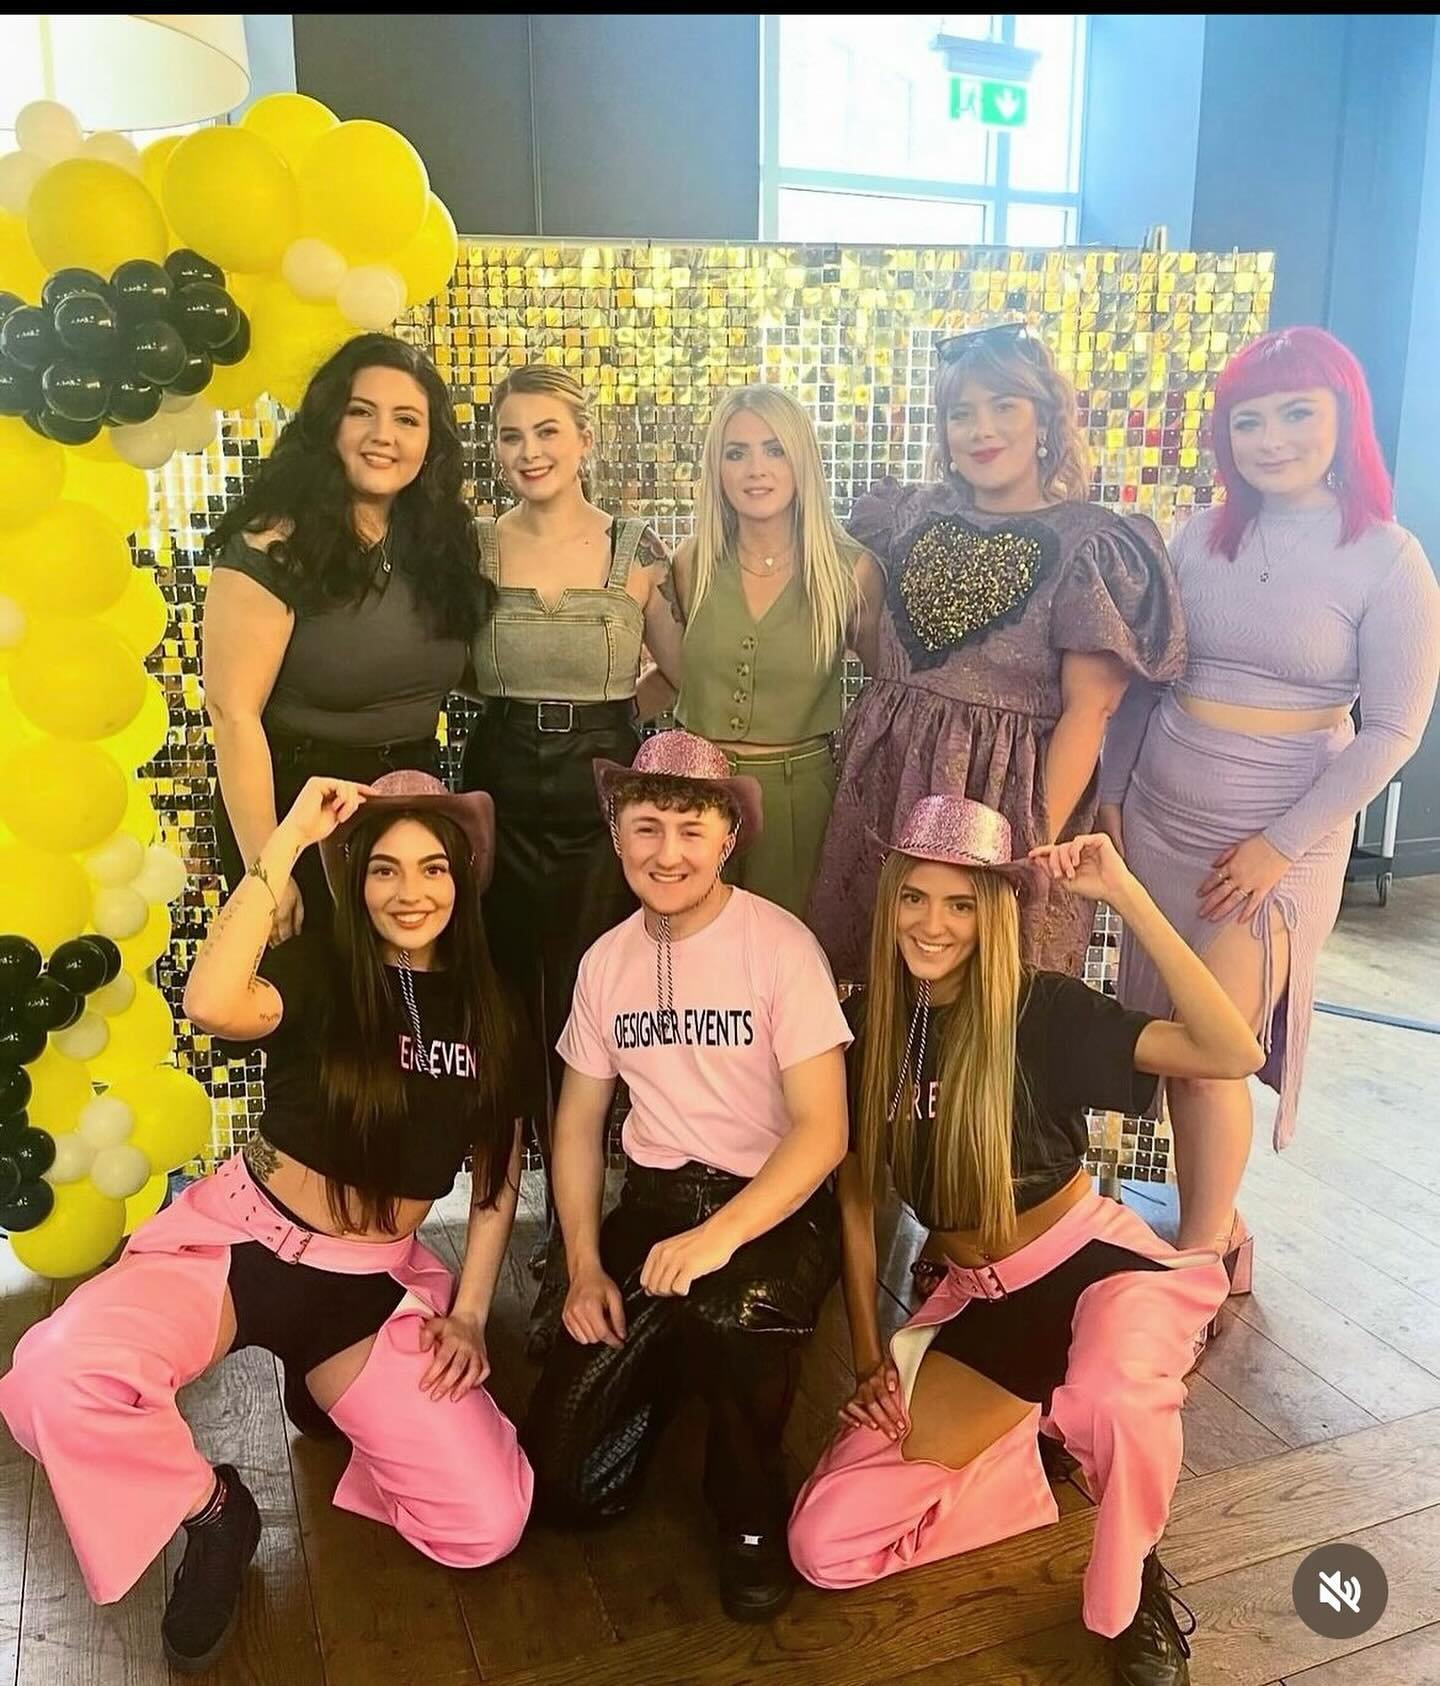 boozy business brunch yesterday 🎷🩷🥂🪩
Thank you so much to @designereventsuk for having us! We&rsquo;re about to plan the biggest end of summer party with these guys for women in business - because YOU deserve it 👏🏻
Keep Saturday 7th September i